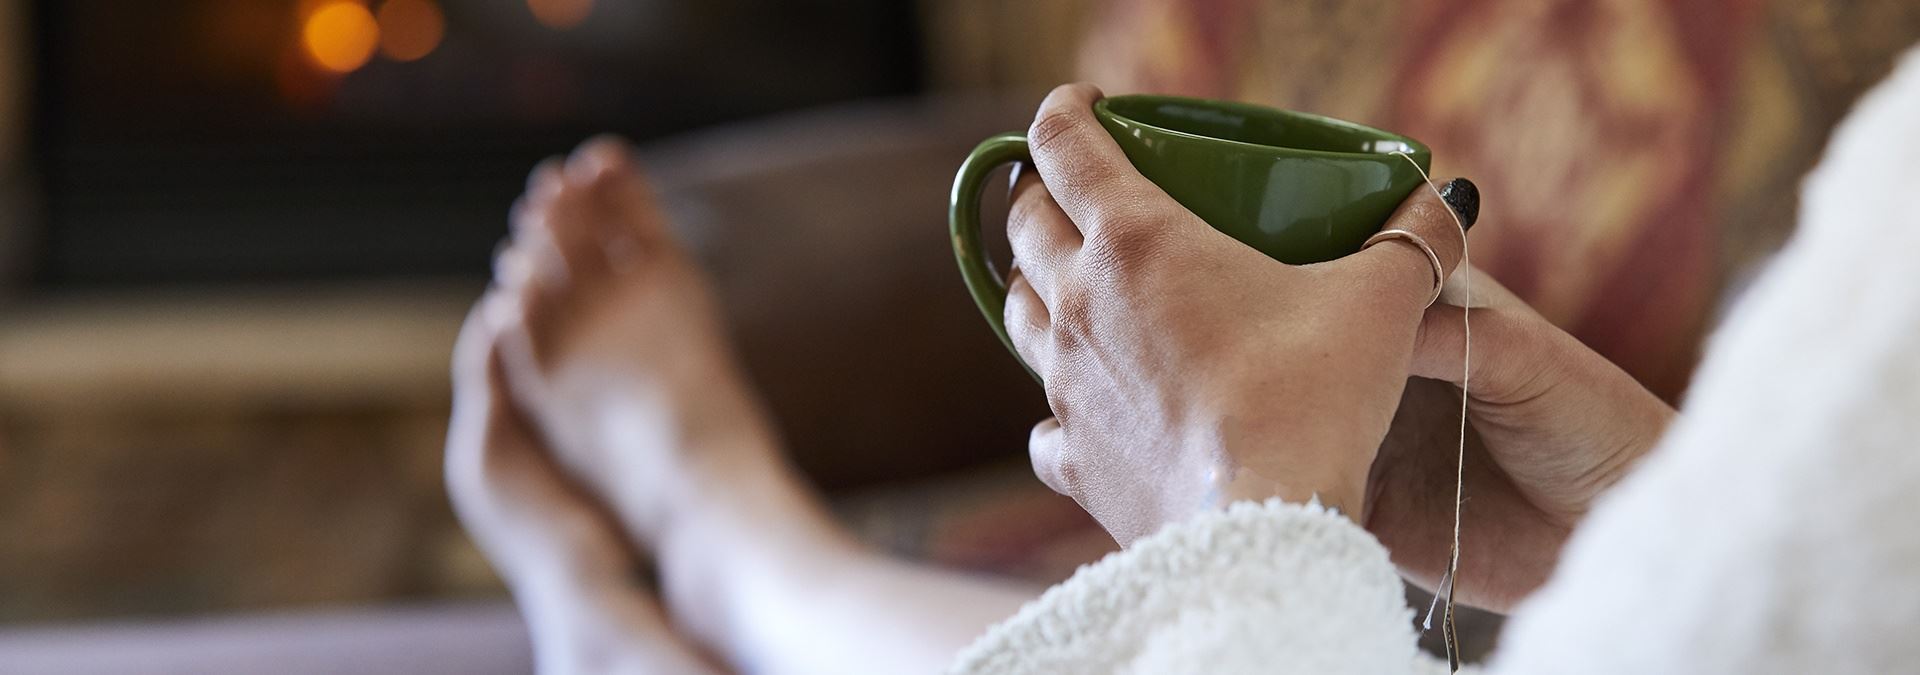 A person wearing a white robe with their feet up holding a cup of tea.